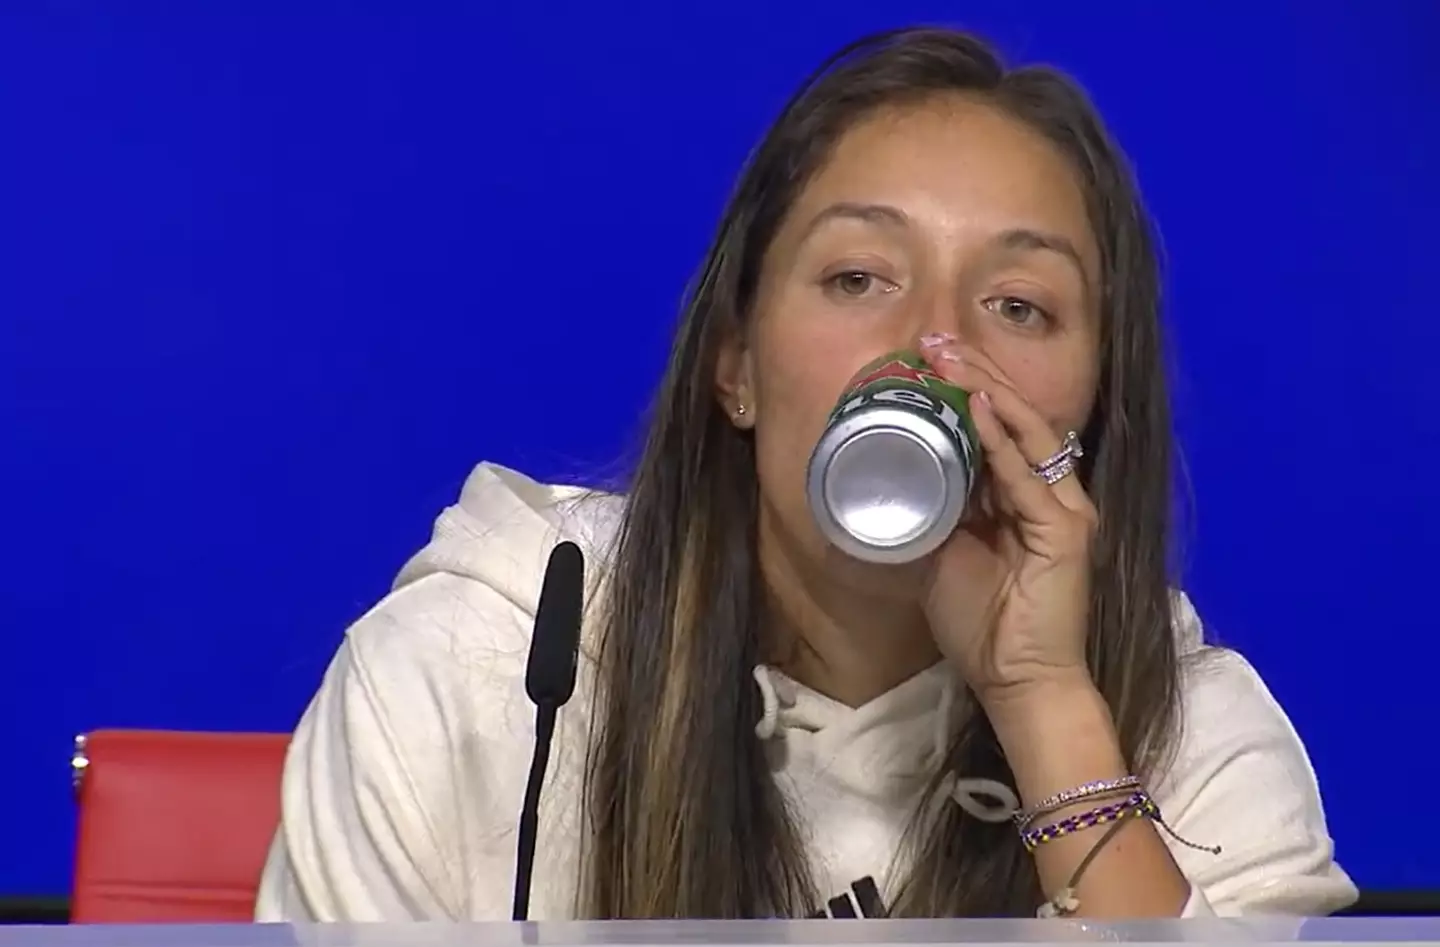 Jessica Pegula sipped from a can of beer after losing a match and getting knocked out of the US Open.